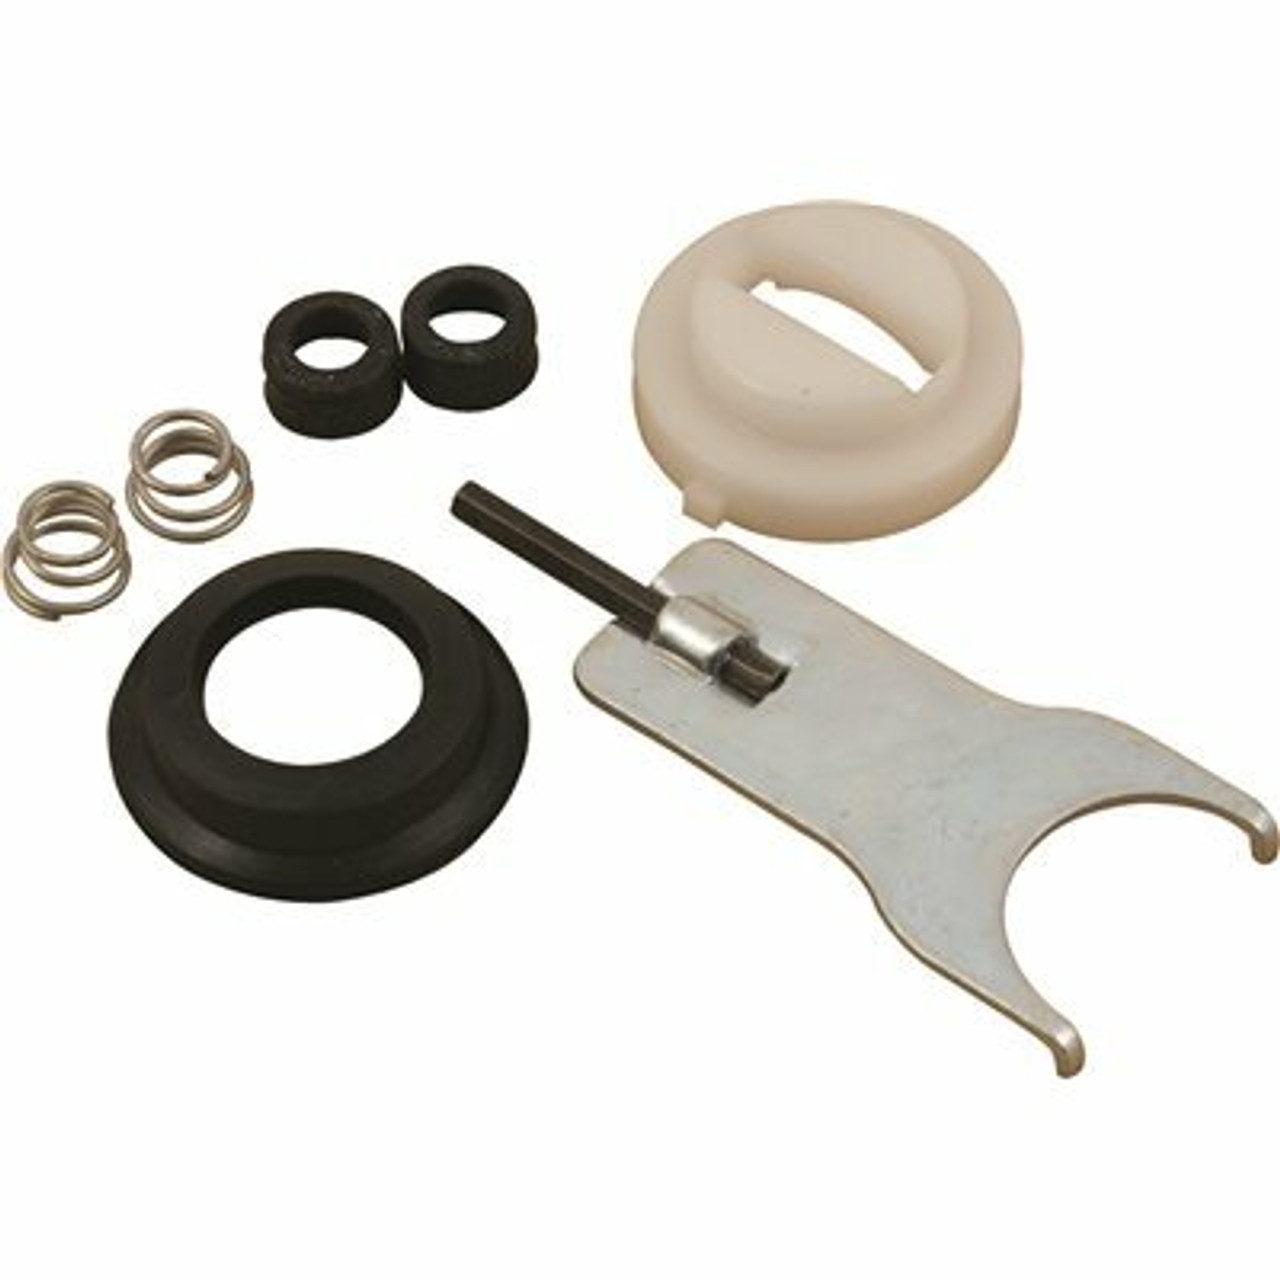 Brasscraft Repair Kit For Delta And Peerless Single-Lever Crystal Handle Faucets